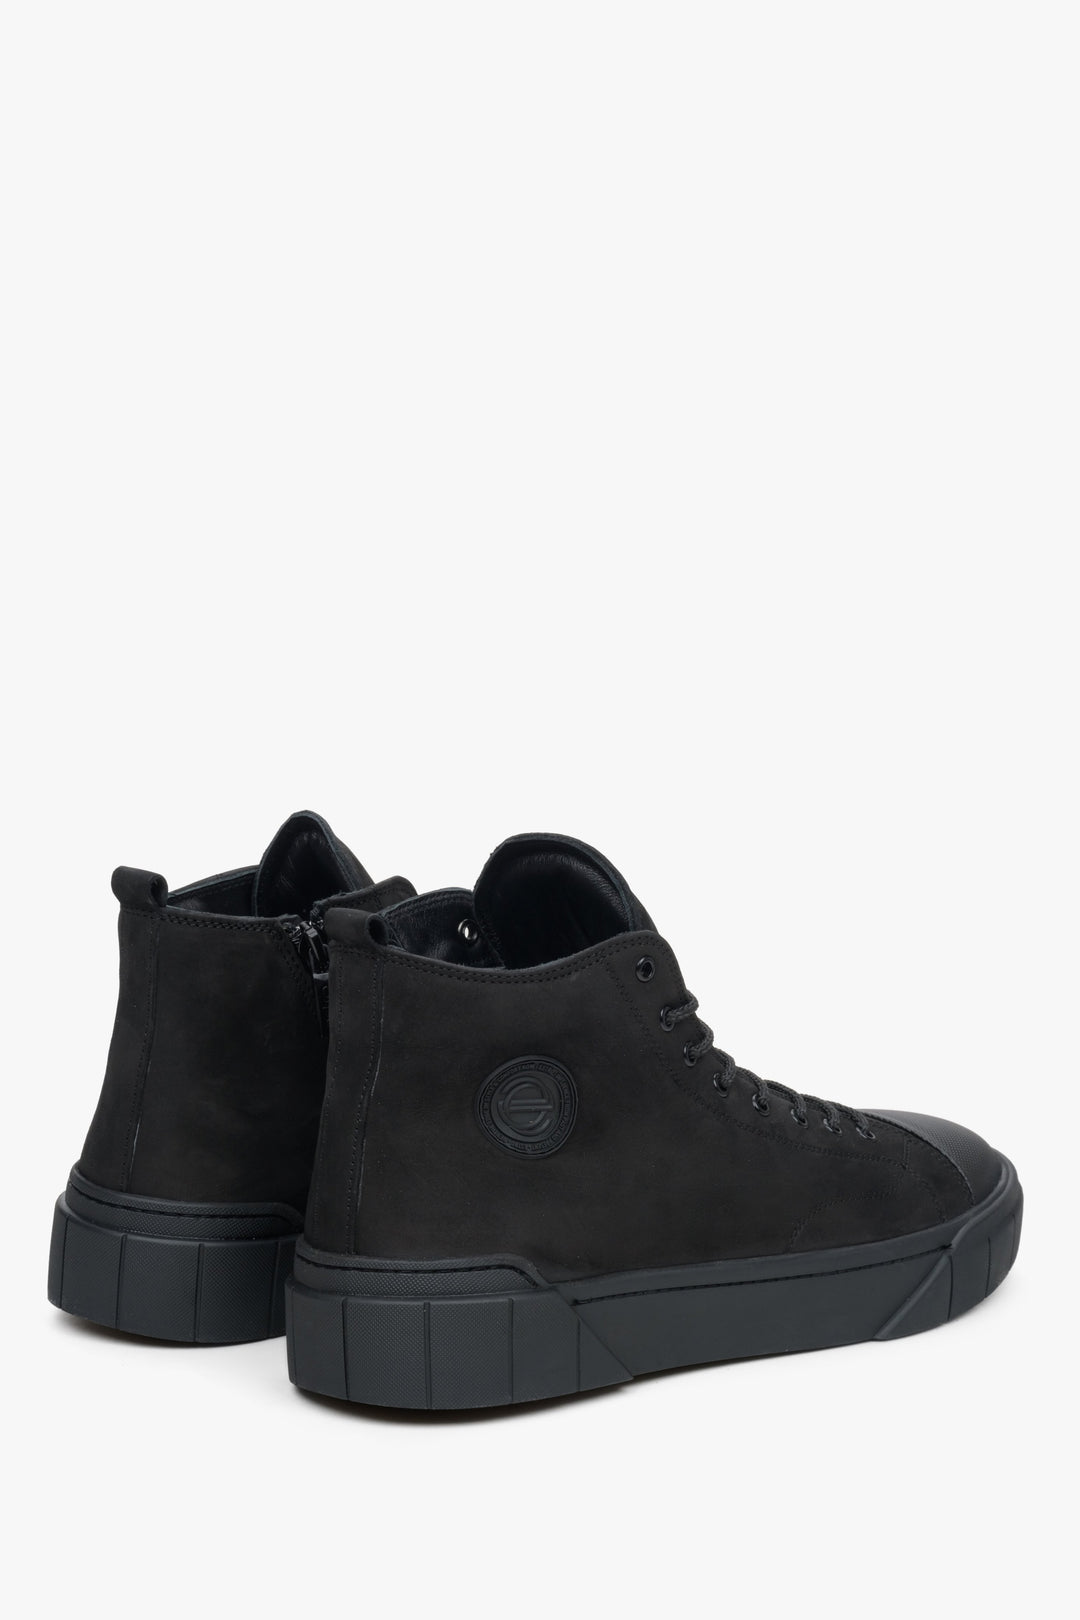 High-top men's winter sneakers in black suede by Estro - close-up on the heel and side seam.